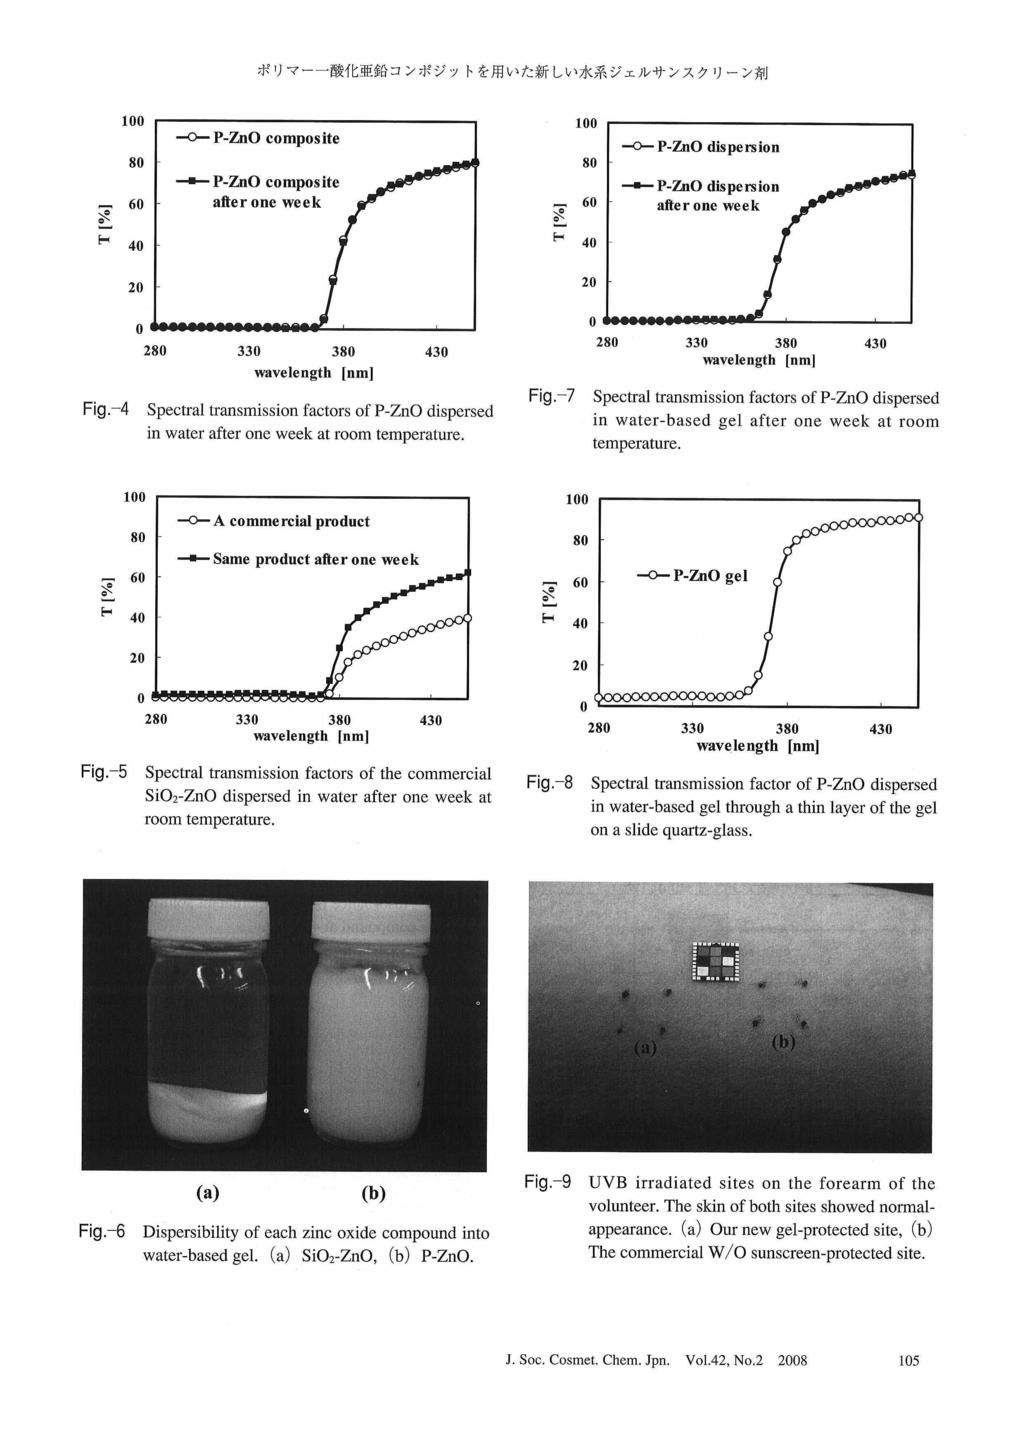 Fig. -4 Spectral transmission factors of P-ZnO dispersed in water after one week at room temperature. Fig.